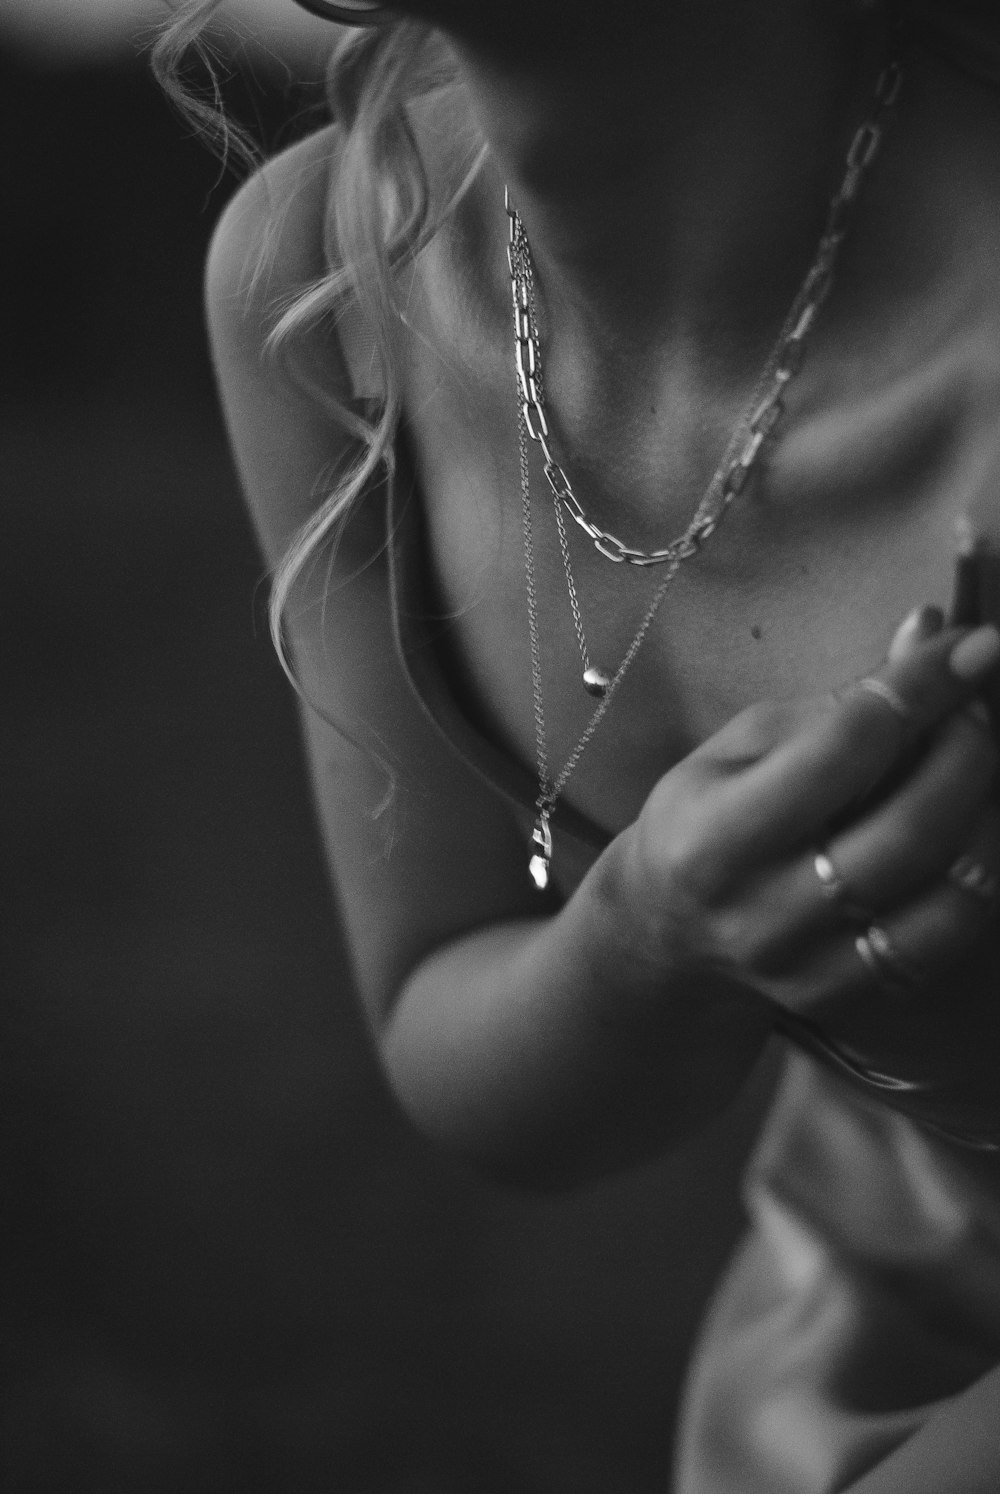 grayscale photo of woman wearing necklace